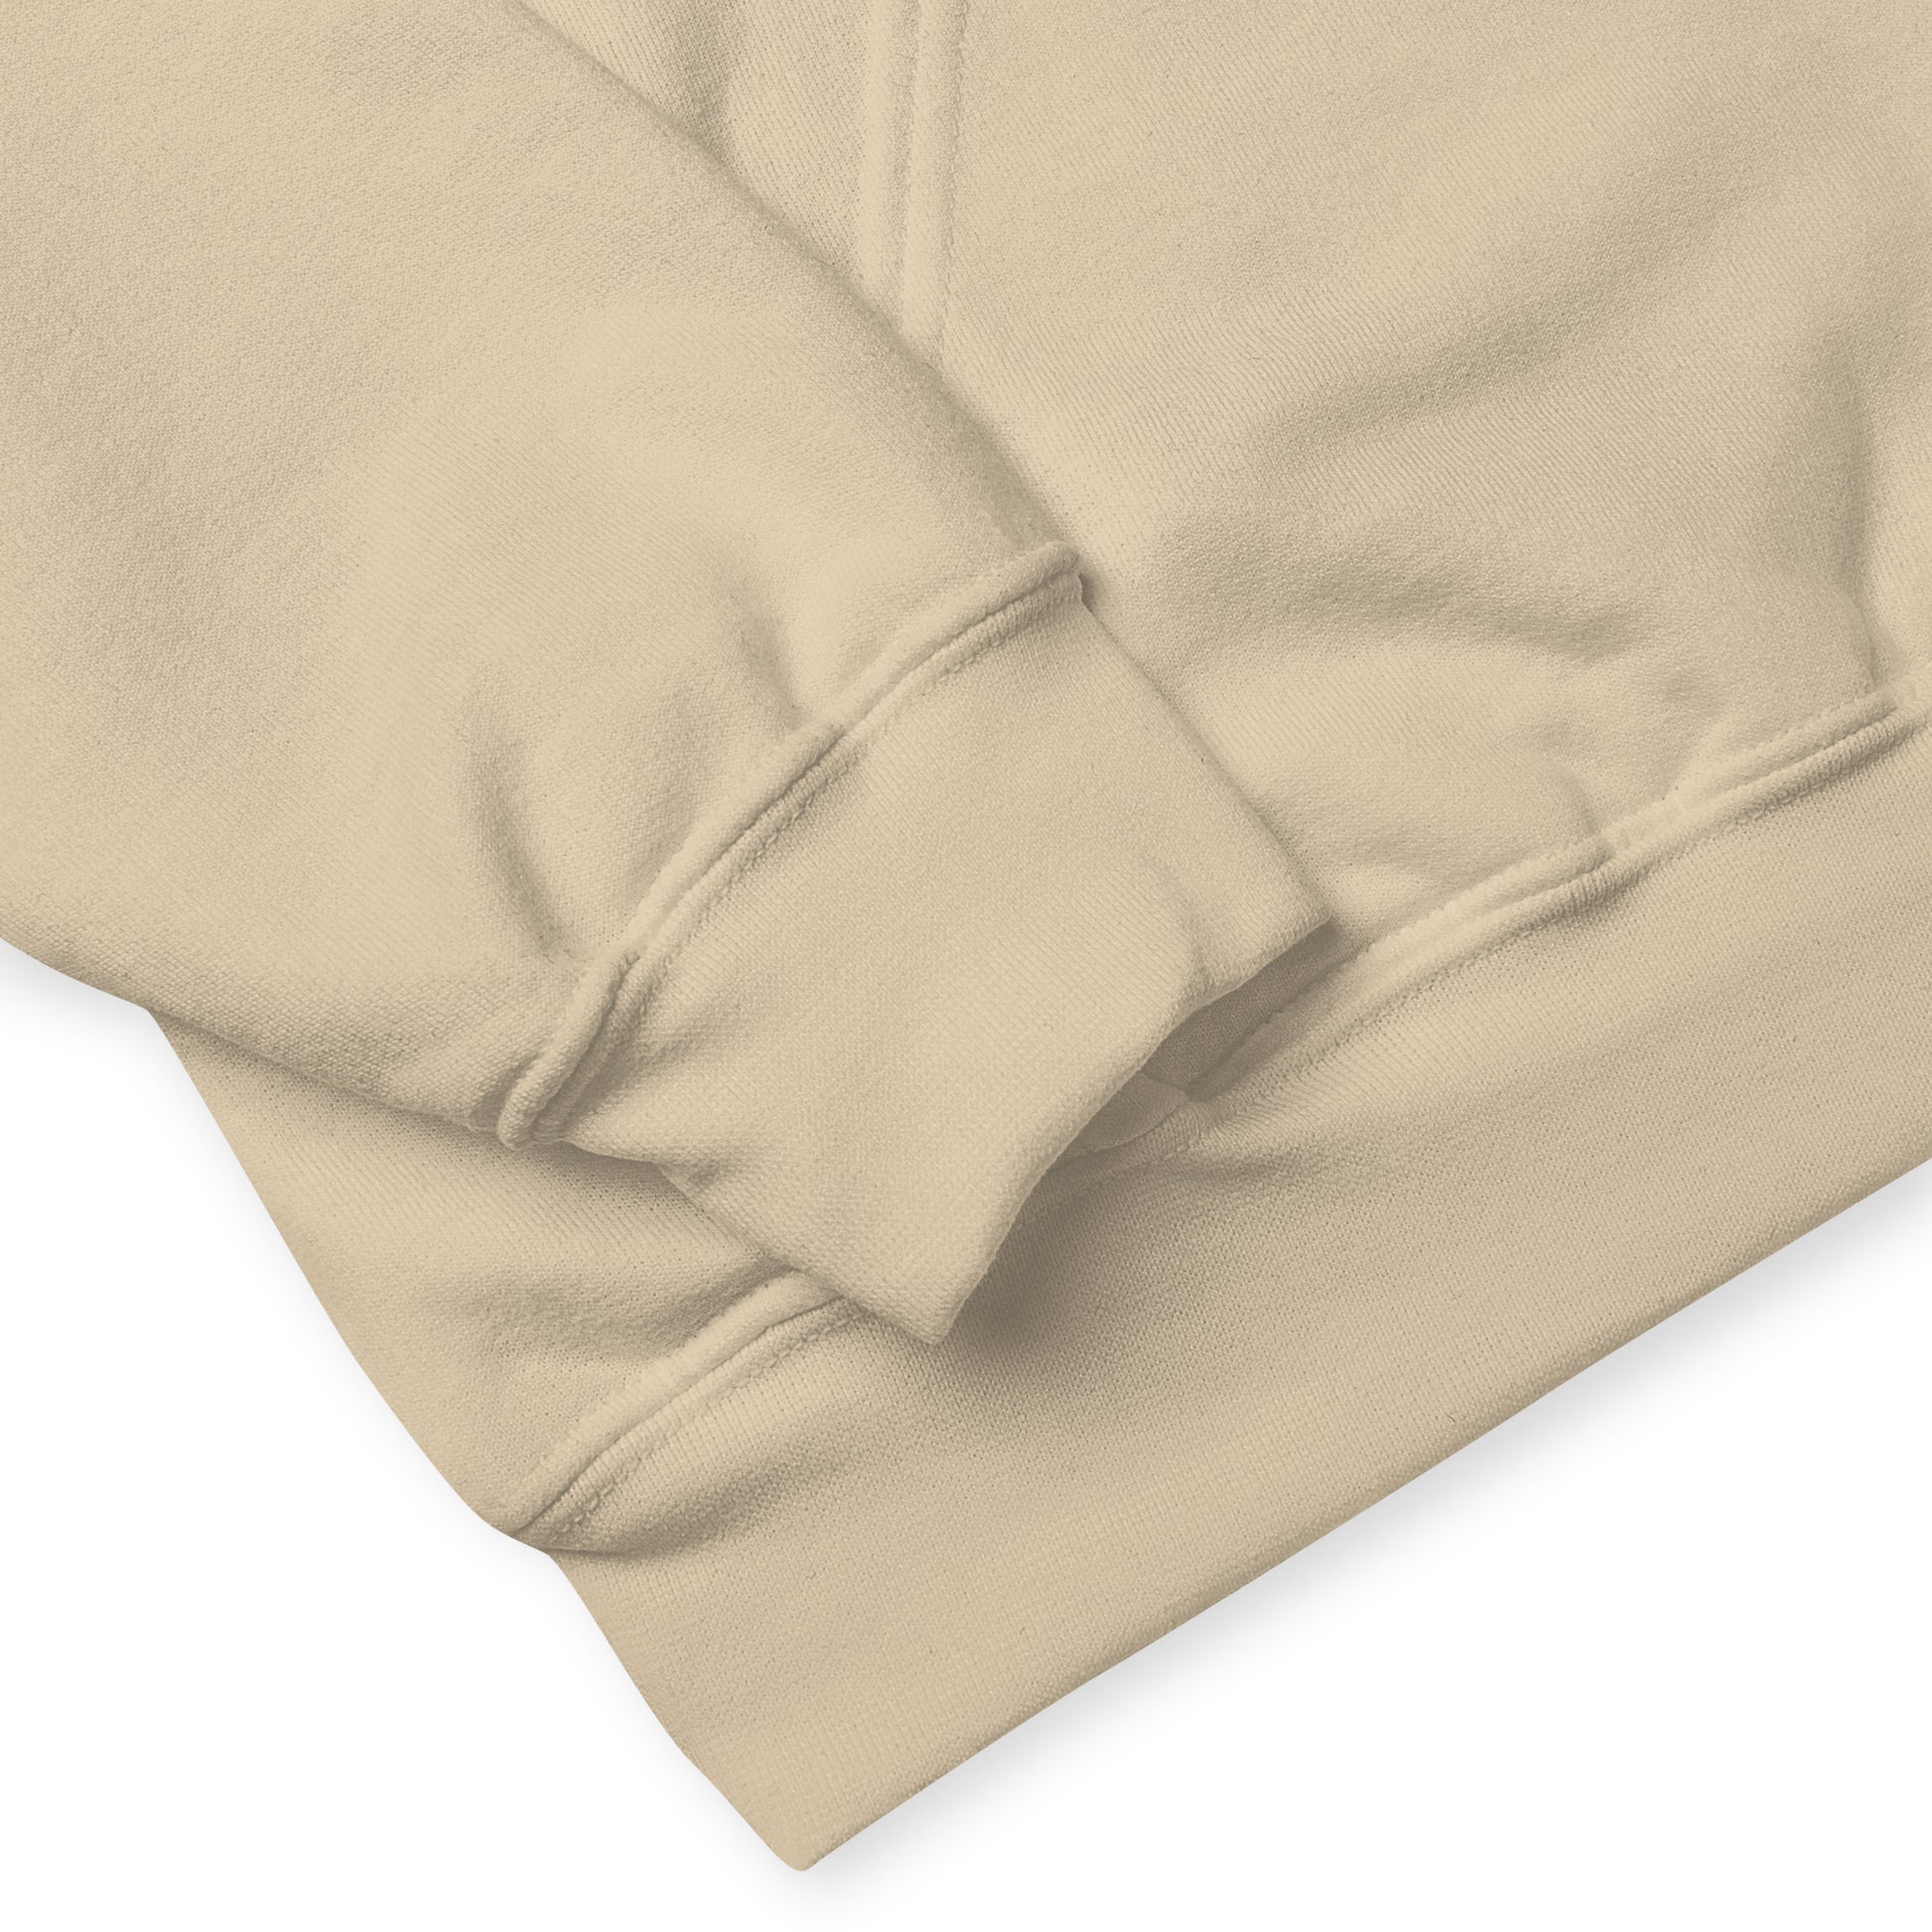 Sand colored unisex cotton/polyester blend hoodie. Features front design of Mushy and his whimsical mushroom friends. Hoodie has double lined hood, front pouch pocket, rib knit cuffs and stretchy waistband. Image shows detail view of cuffs and waistband.